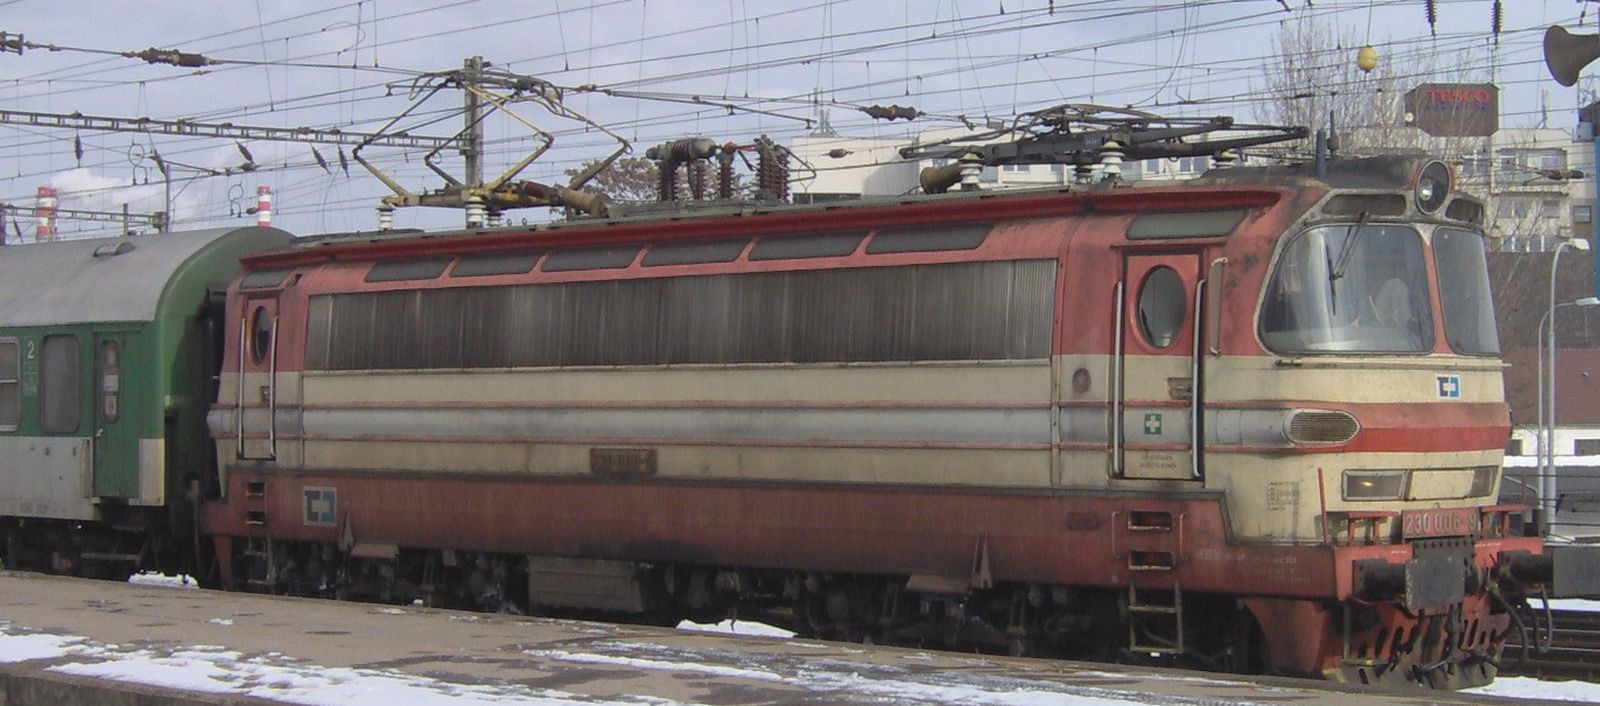 230 006 in old livery in February 2009 in Brno